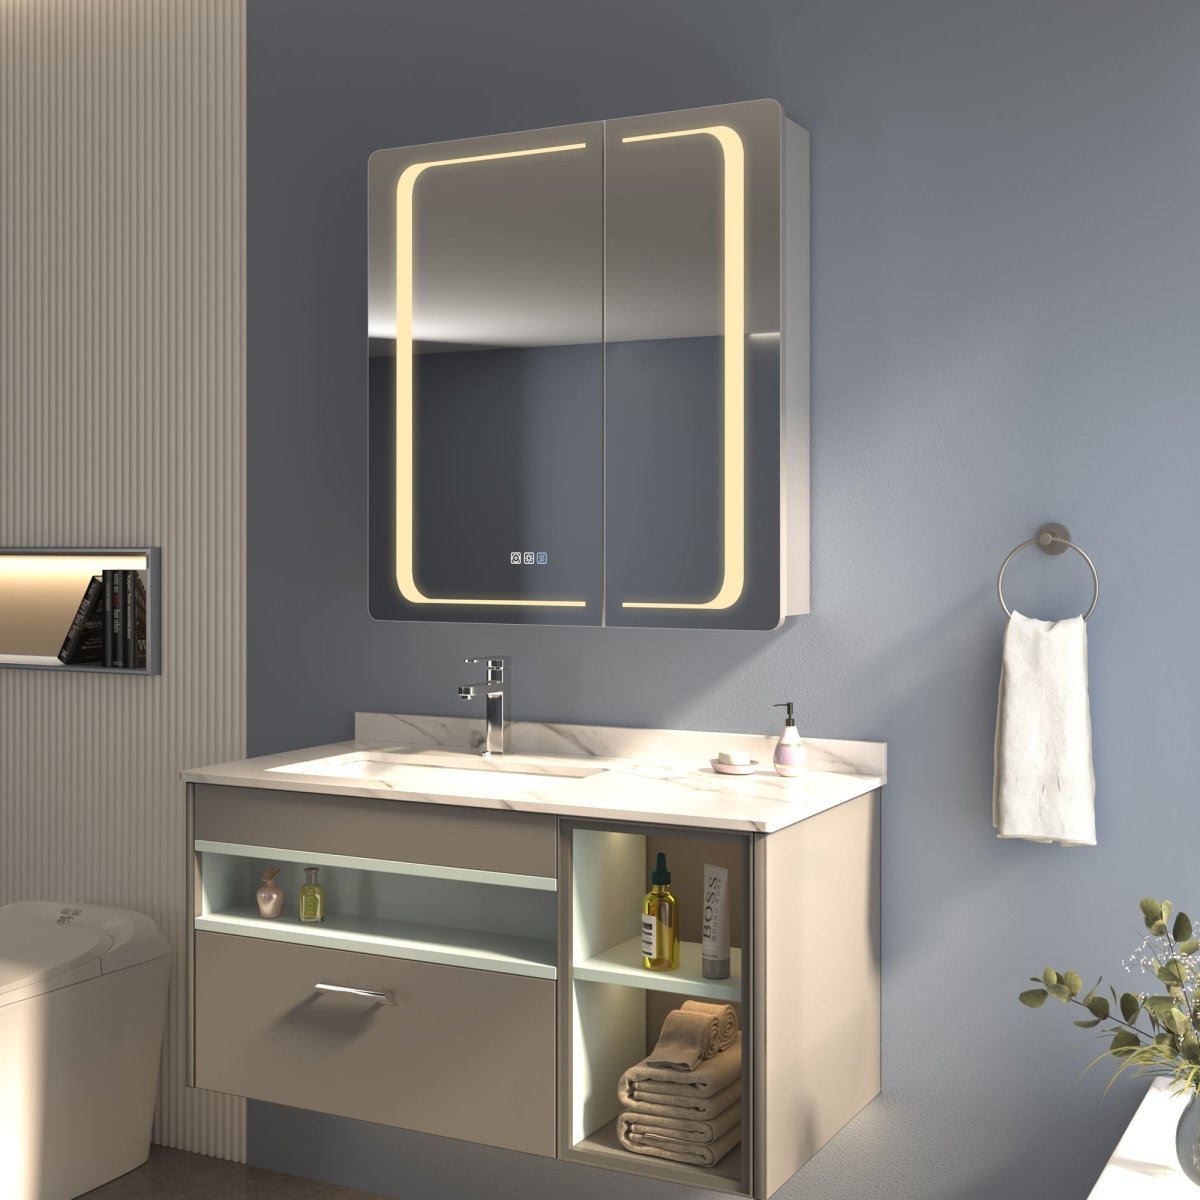 ExBrite 30" W x 32" H LED Lighted Bathroom Medicine Cabinet with Mirror Recessed or Surface Mounted LED Medicine Cabinet